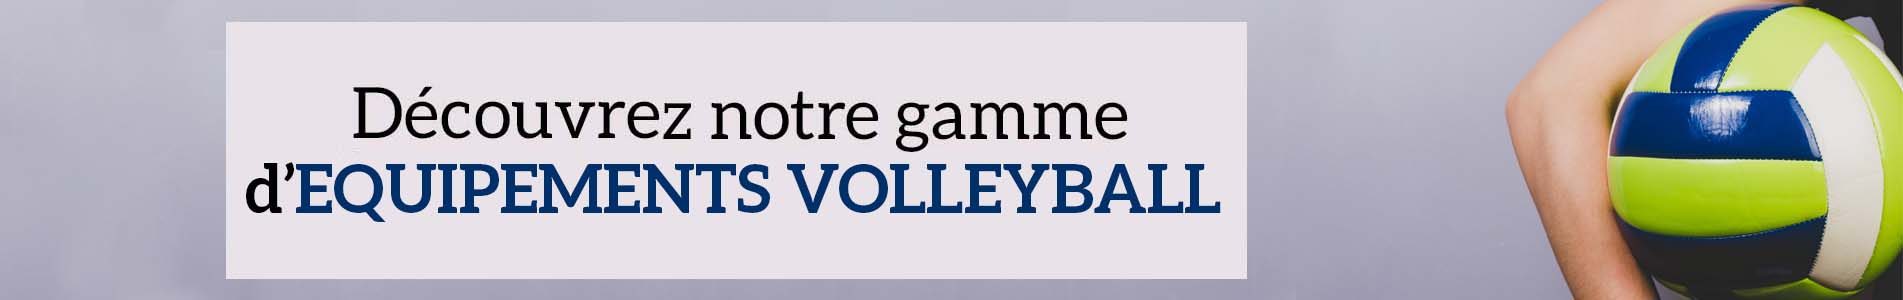 bandeau equipement volleyball